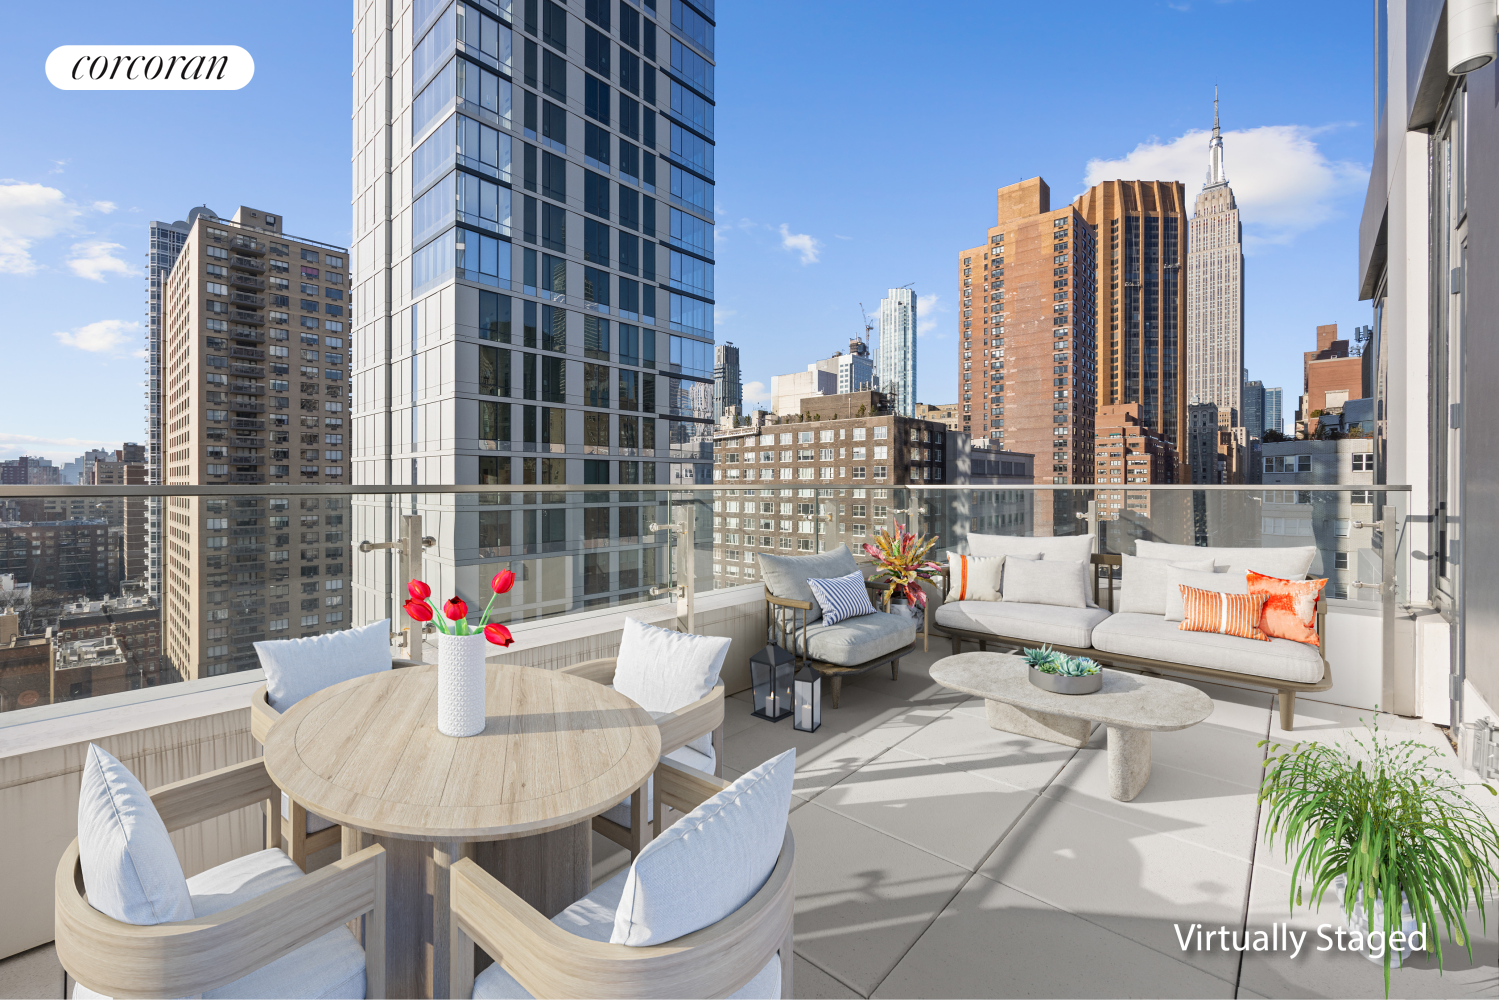 509 3rd Avenue 17D, Murray Hill, Midtown East, NYC - 2 Bedrooms  
2 Bathrooms  
5 Rooms - 